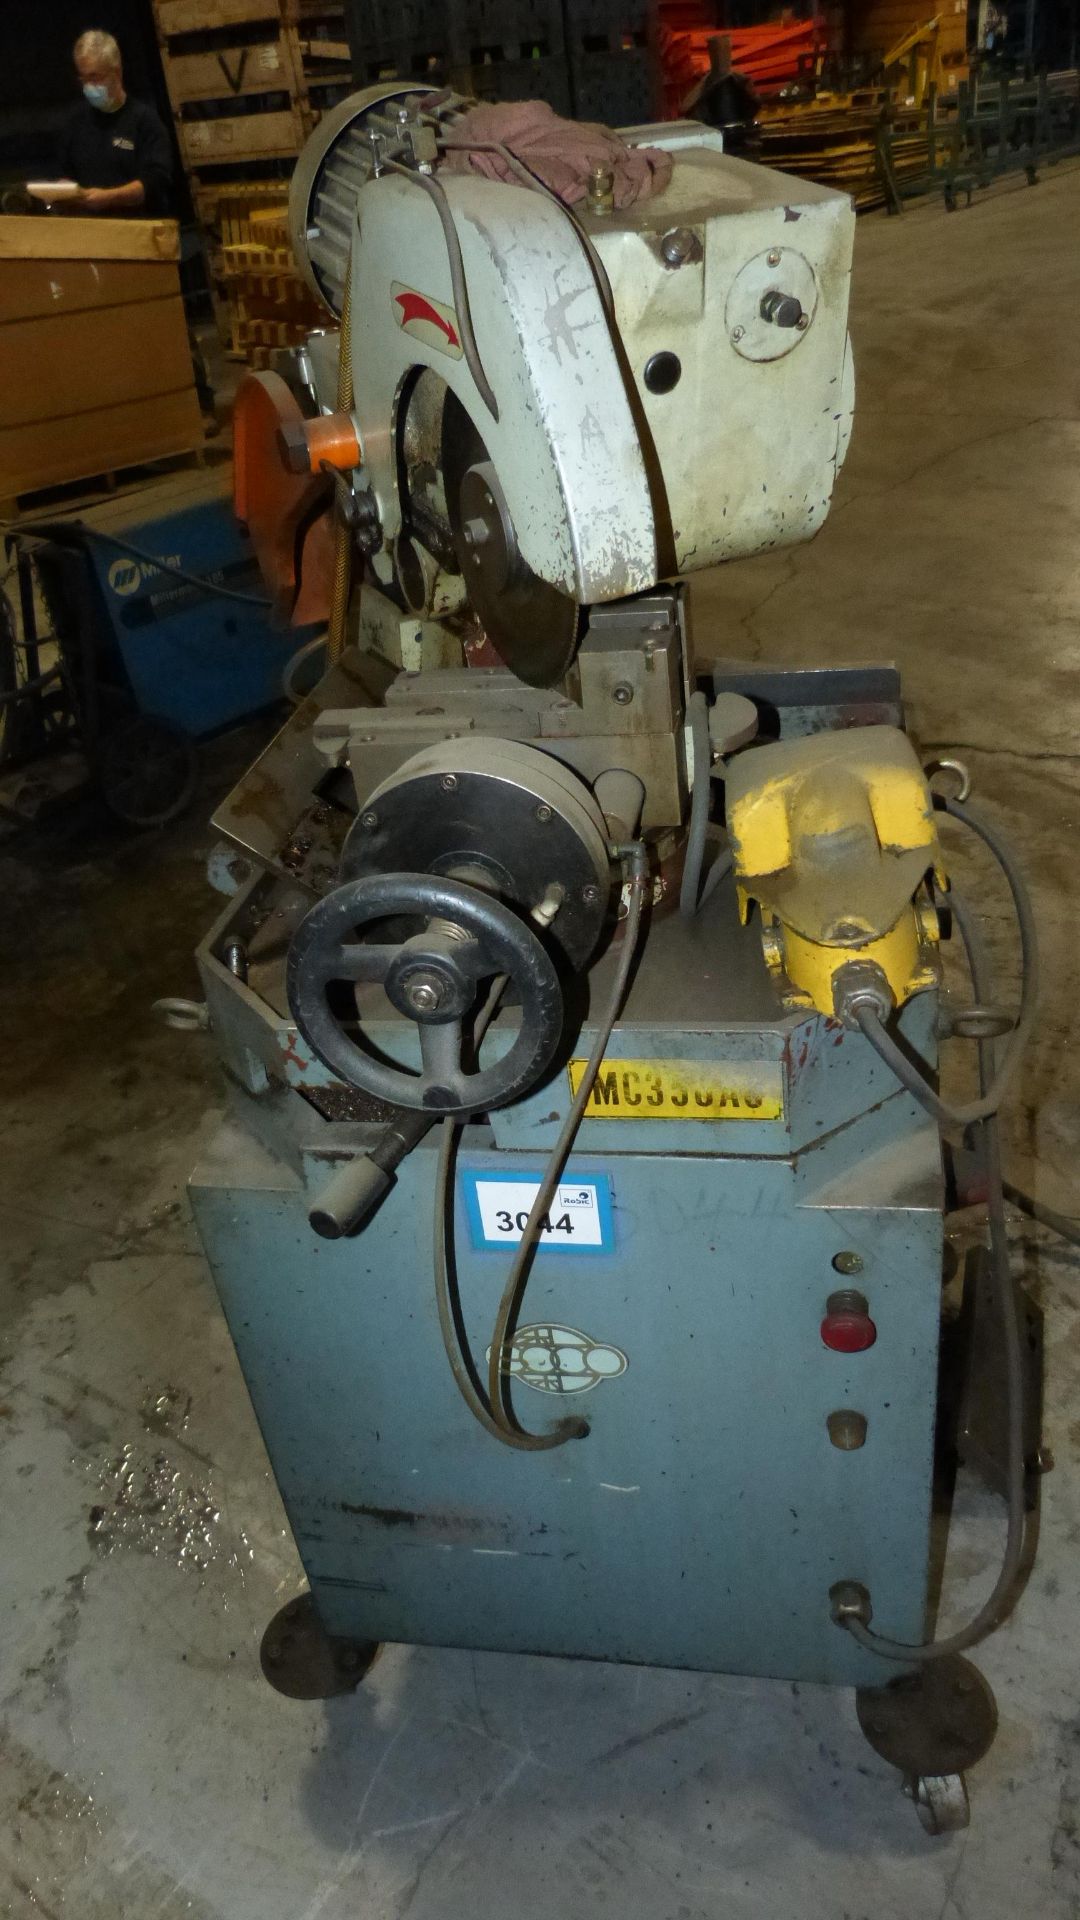 Soco model MC350AC 13" Cold Cut Saw, Foot Pedal Controlled - Image 2 of 5